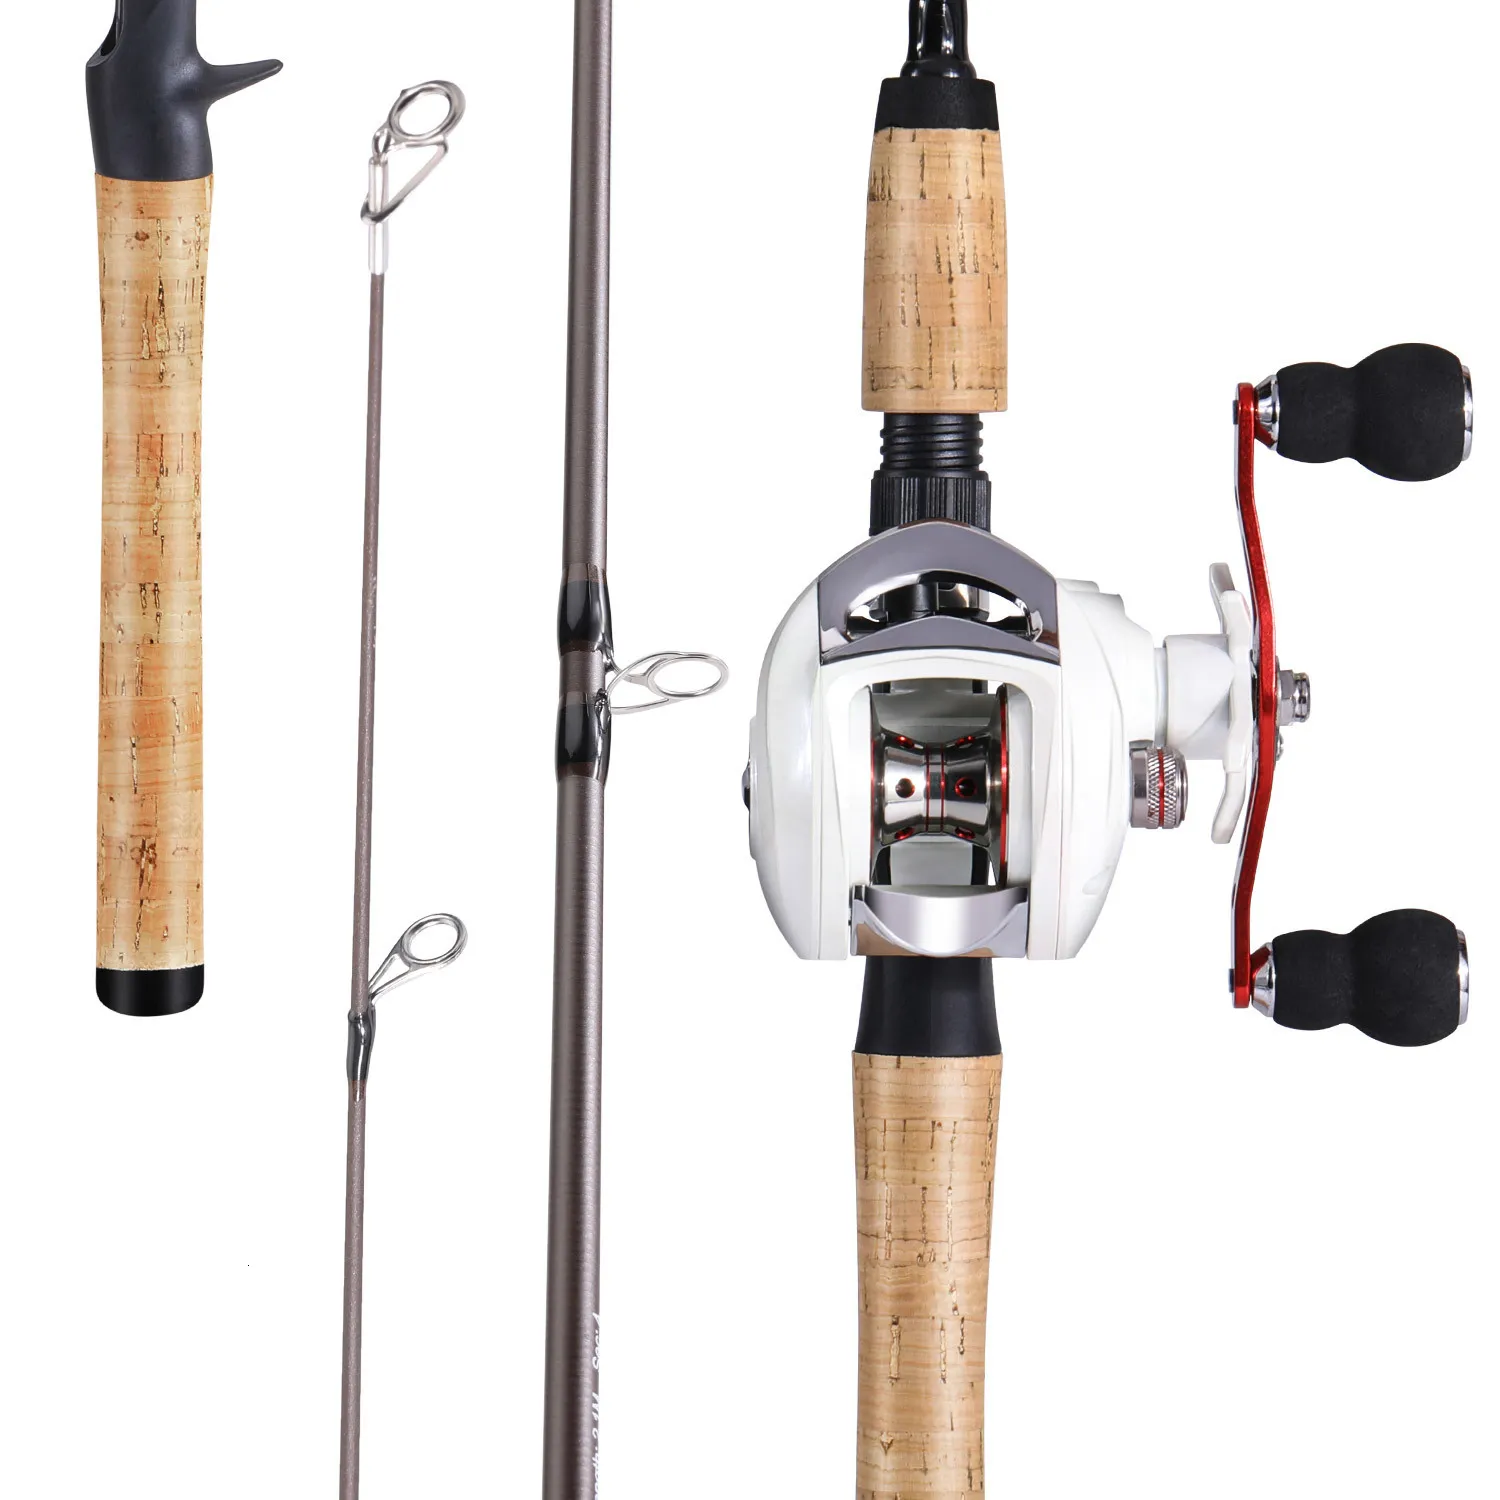 Sougayilang 2.1m Cork Handle Pflueger Spinning Rod For Fishing And Casting  Lightweight Bass, Trout, Crappie Set 230609 From Ren05, $34.83